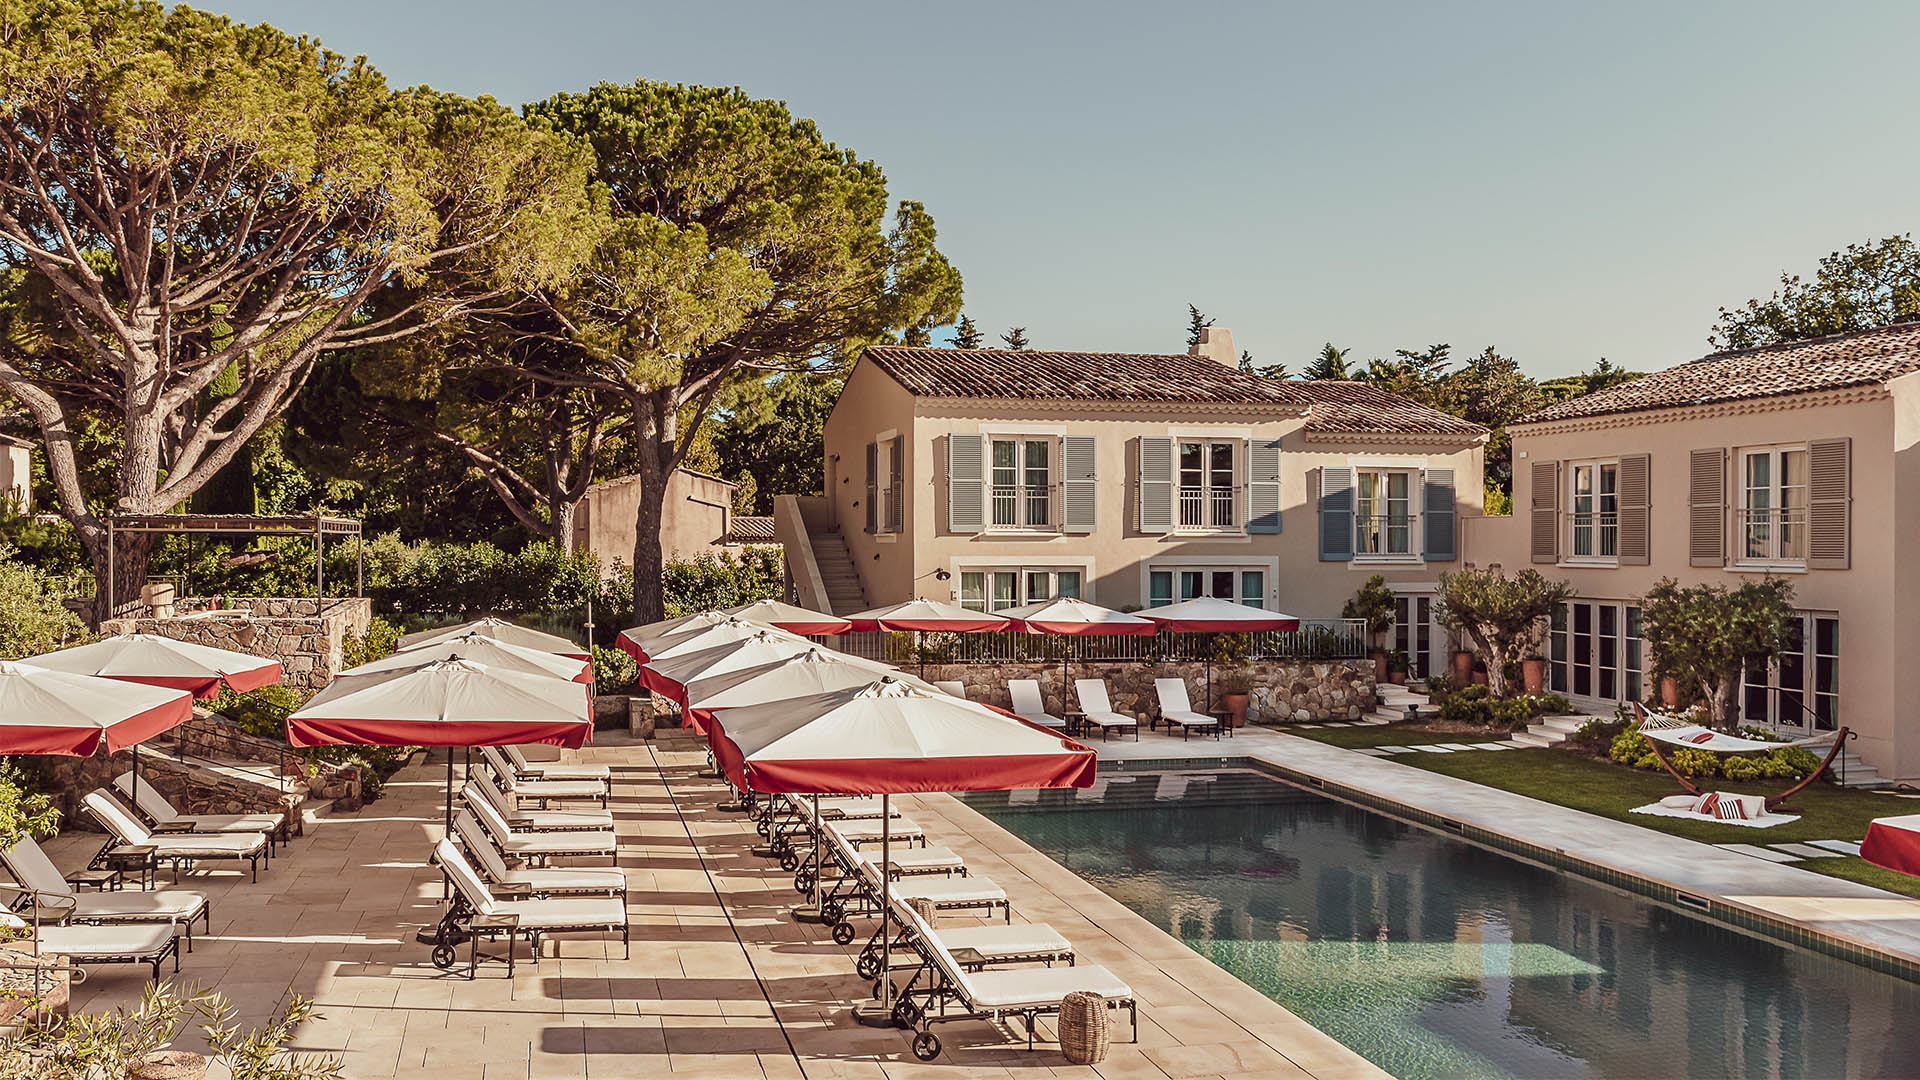 Riviera chic: 10 must-visit hotels on the Côte d'Azur - Small Luxury ...